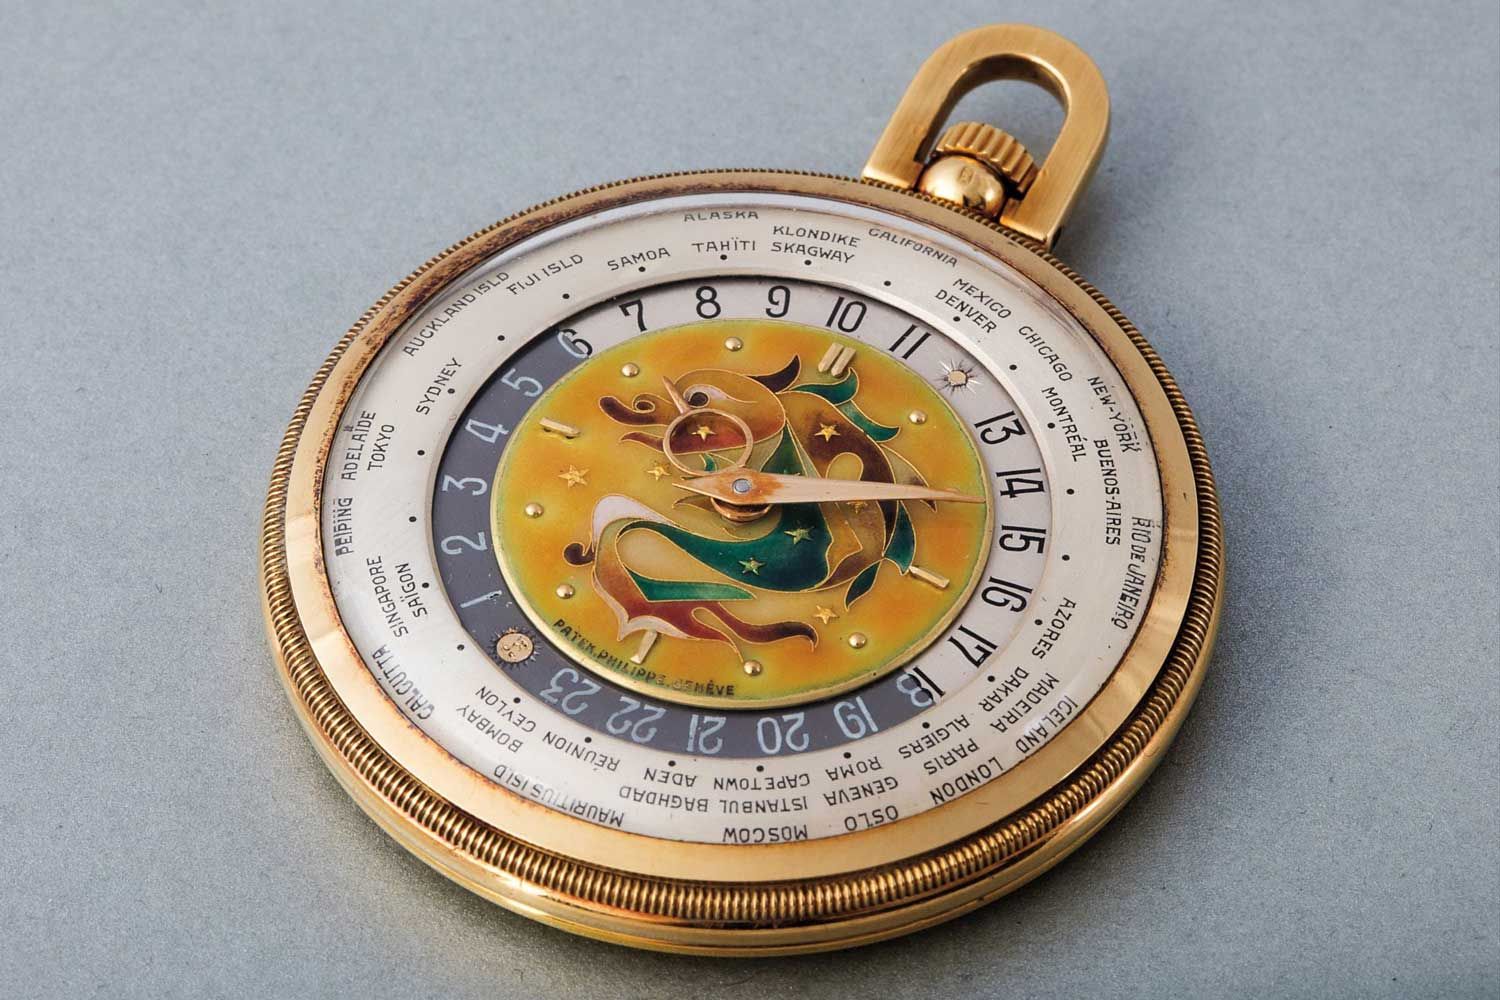 Patek Philippe ref. 605 HU with a cloisonné enamel dial depicting a mythical Dragon (Image: Phillips)